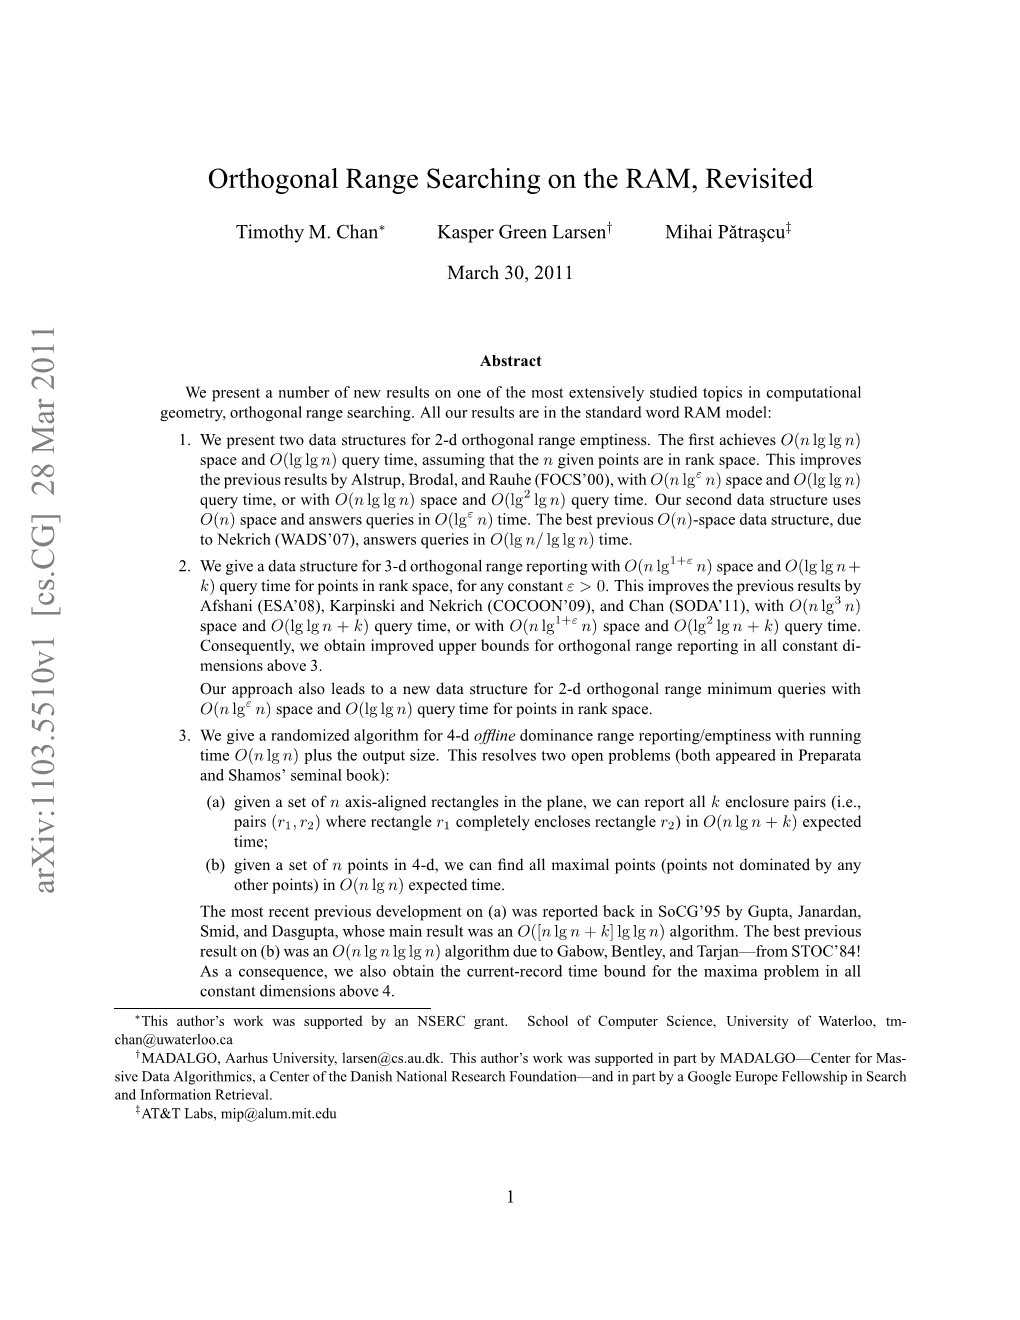 Orthogonal Range Searching on the RAM, Revisited